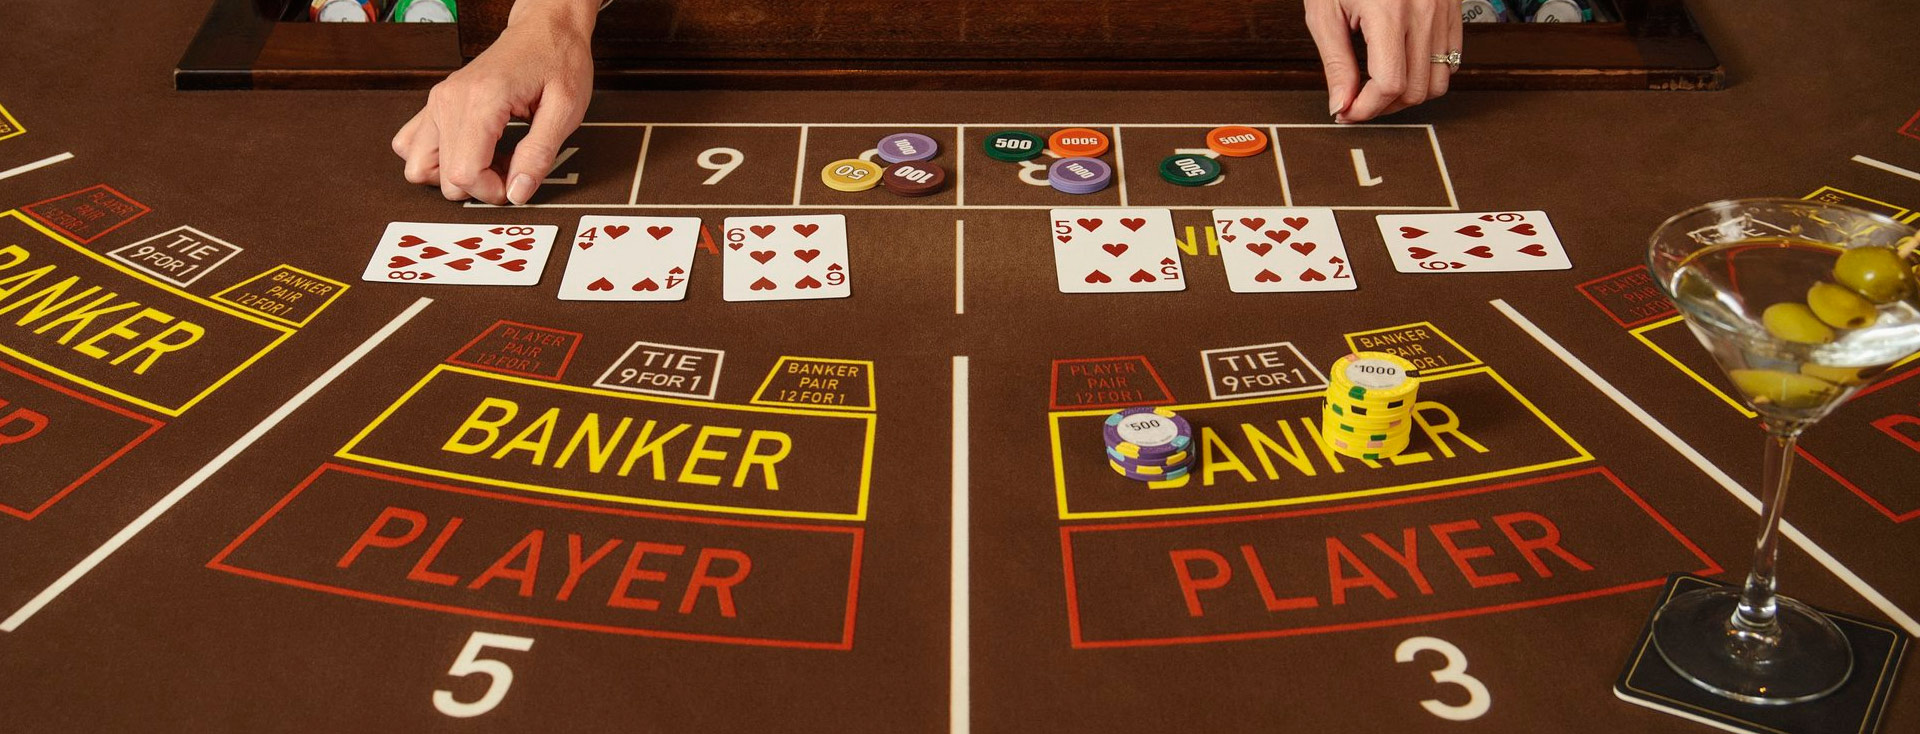 How To Play Baccarat At Casino